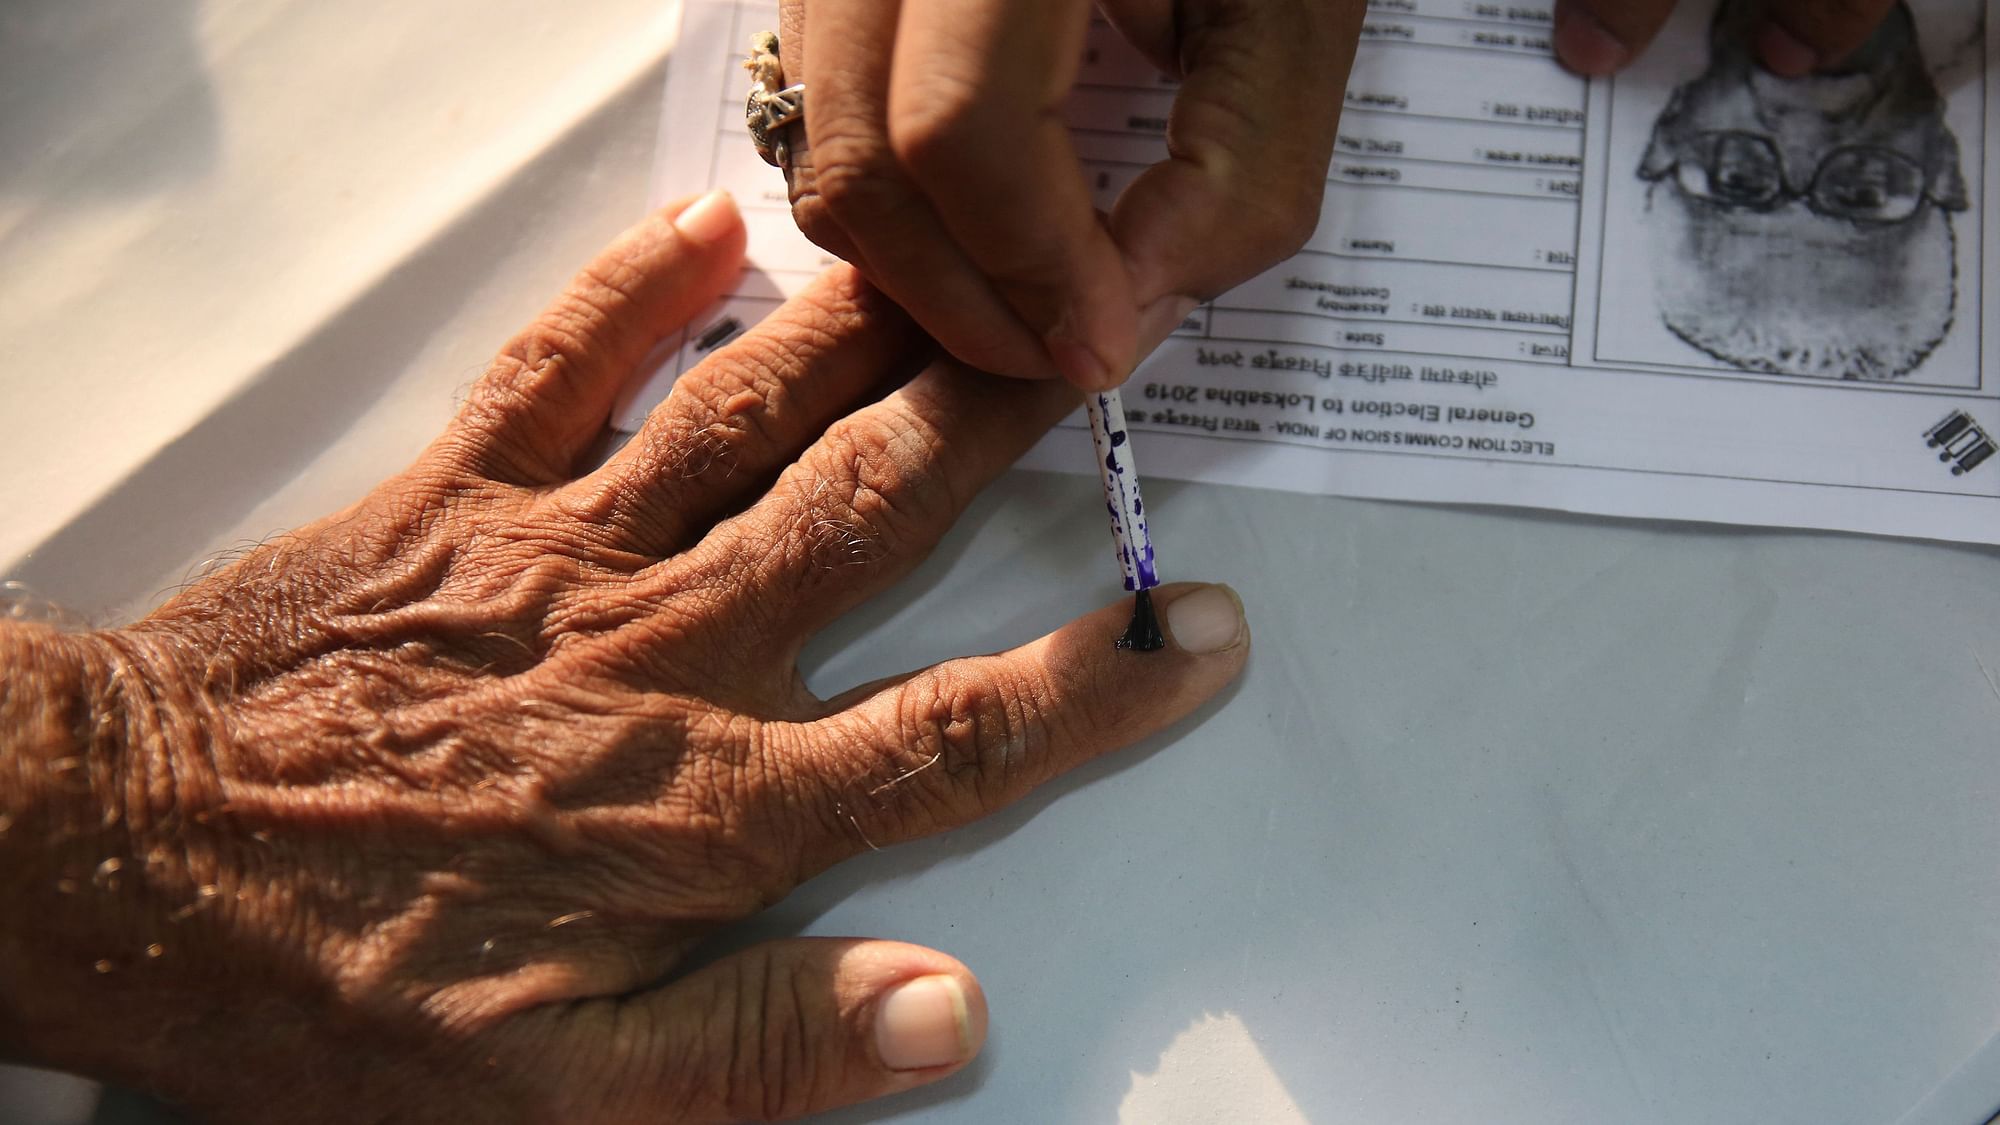 File photo of an  elderly citizen getting ink mark on his finger prior to voting.